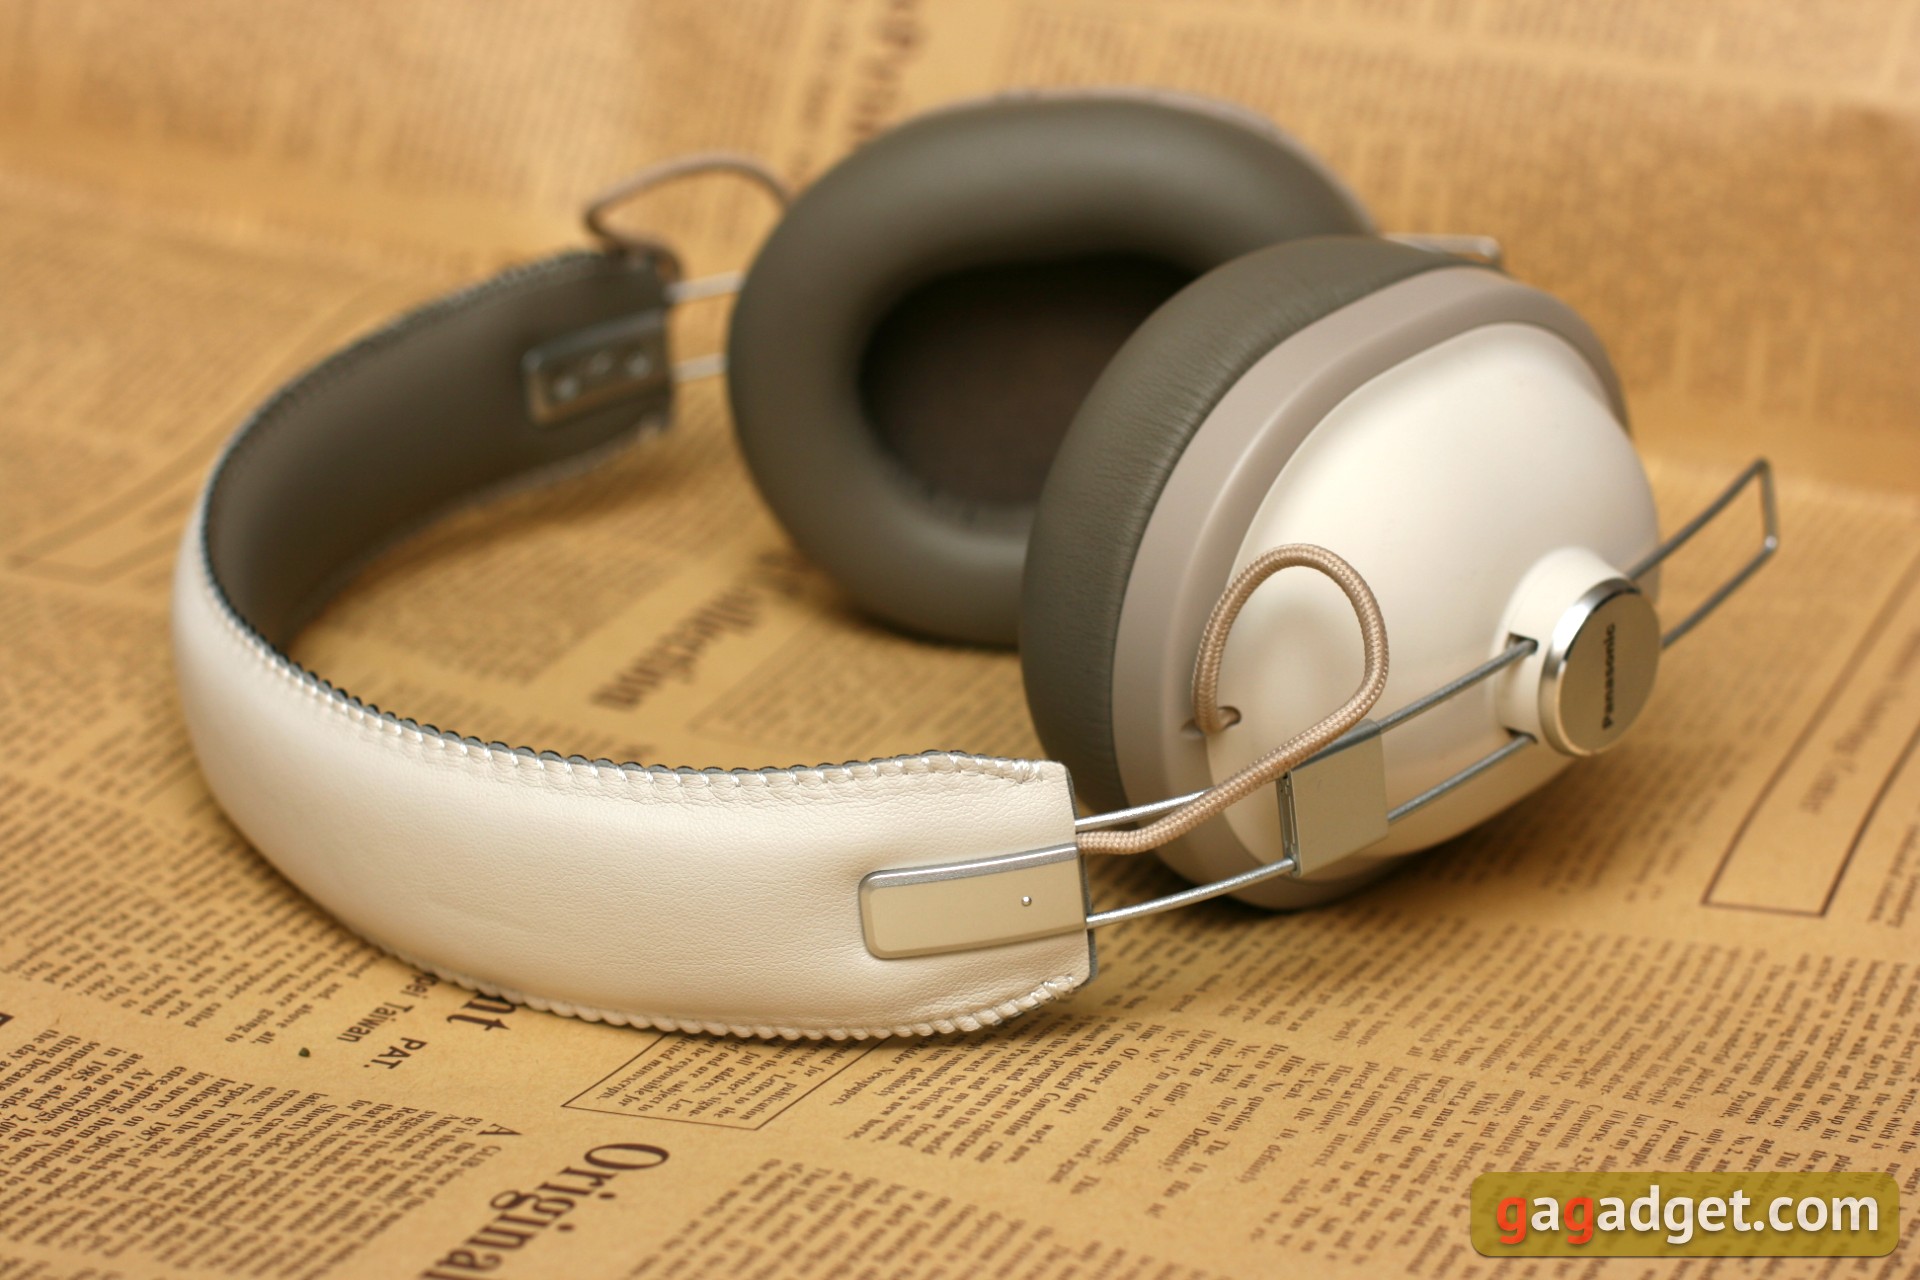 Panasonic RP-HTX90 look back: effective retro headphones with noise-cancelling-4